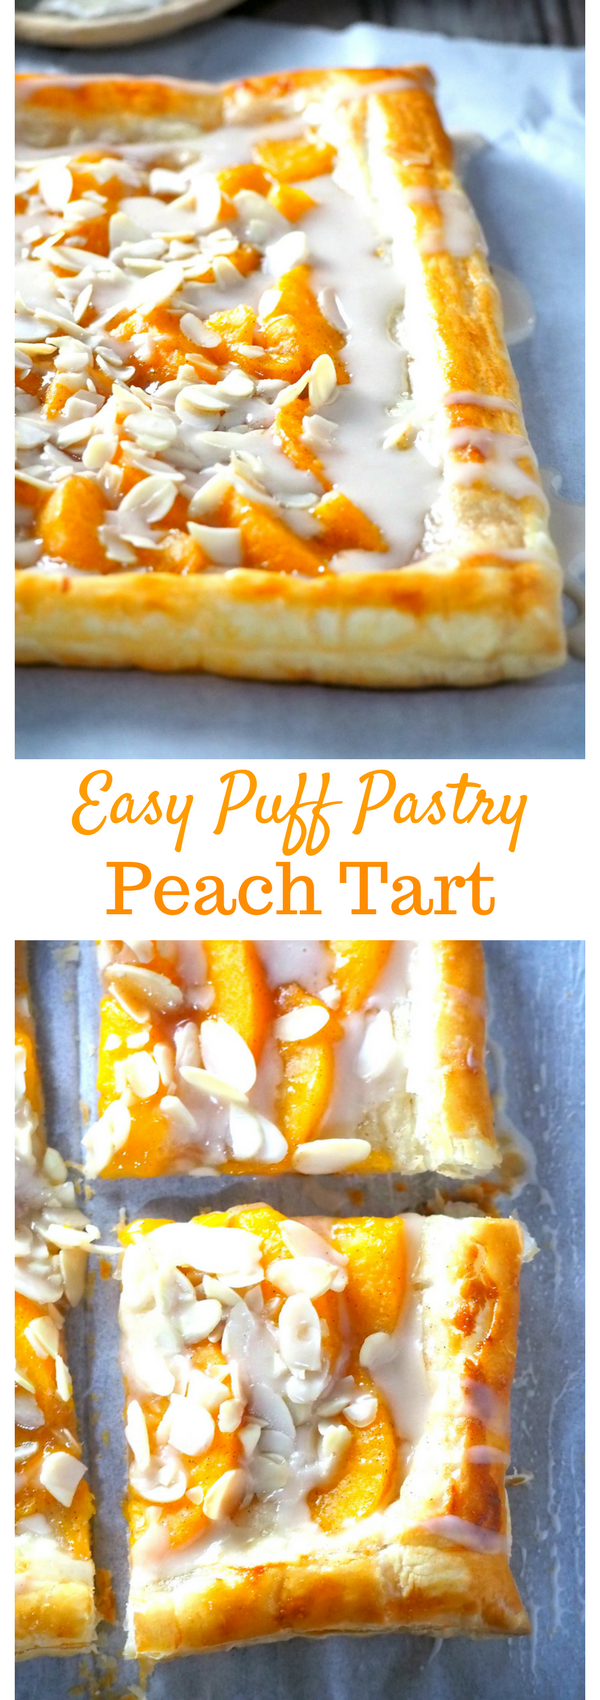 An easy peach dessert that you can make in no time, this pech tart is a delicious and elegant pastry that is sweet, fresh and buttery.